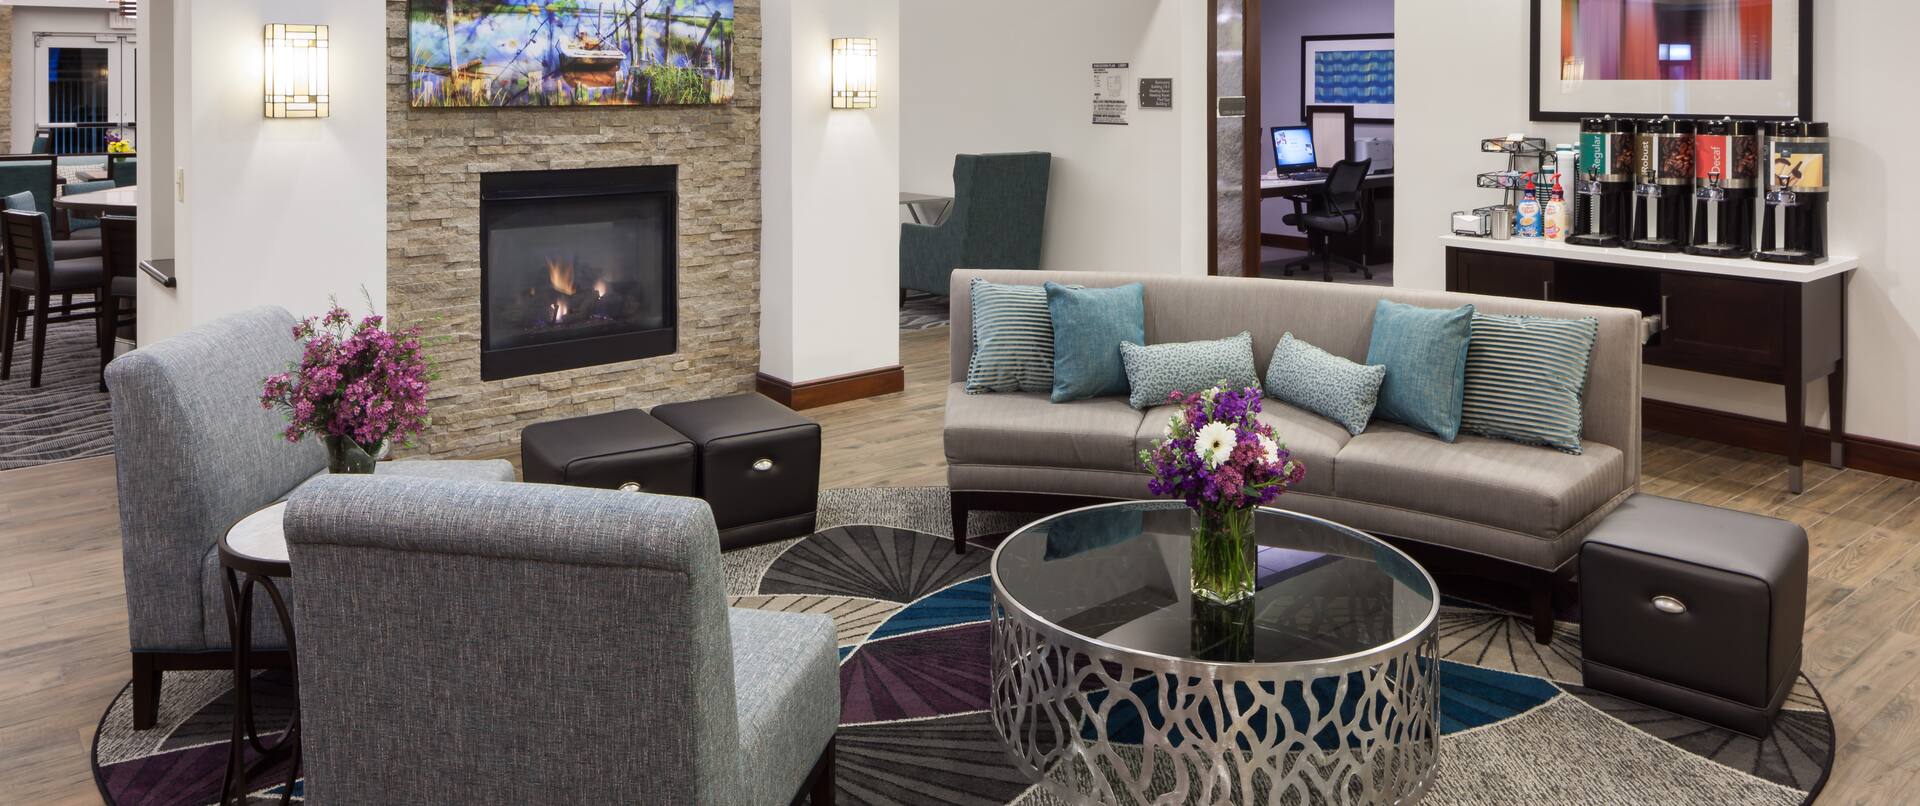 Lobby Seating, Fireplace, Coffee Station